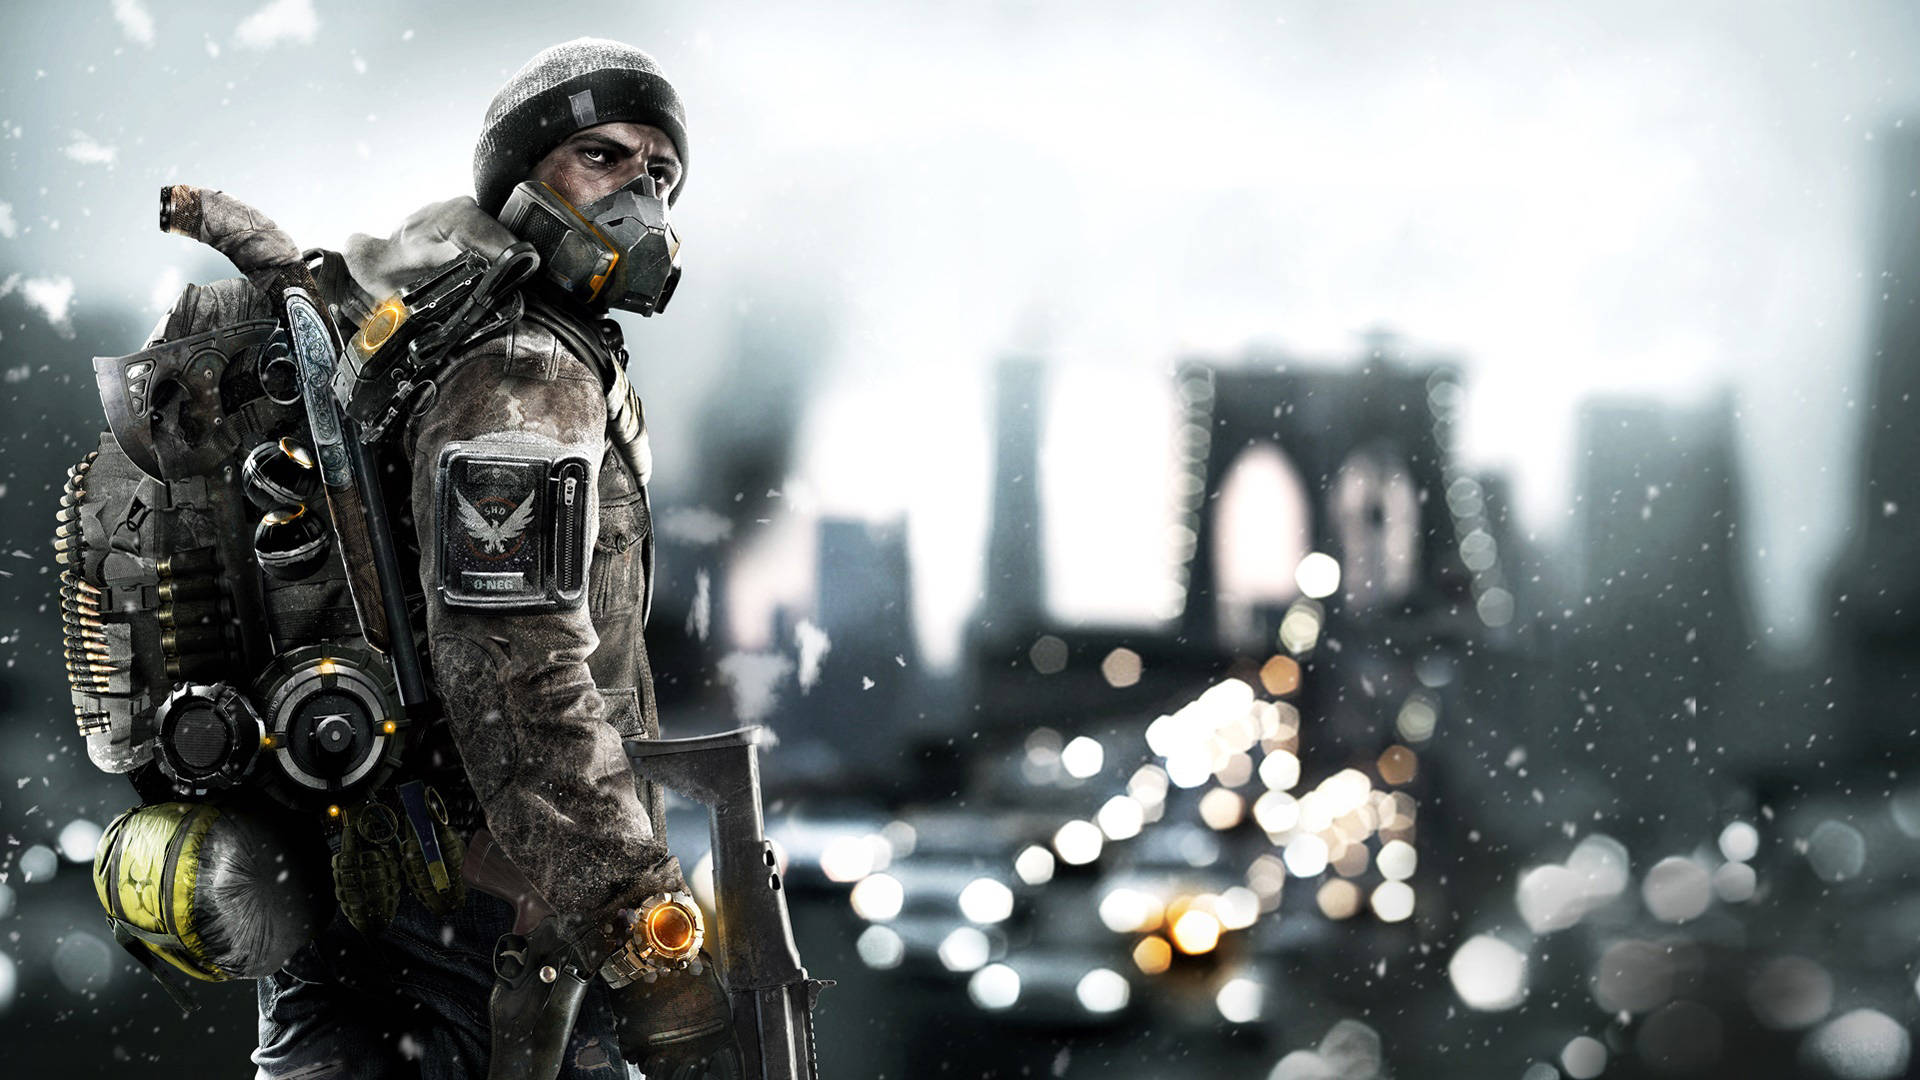 Man Wearing Gas Mask The Division 4k